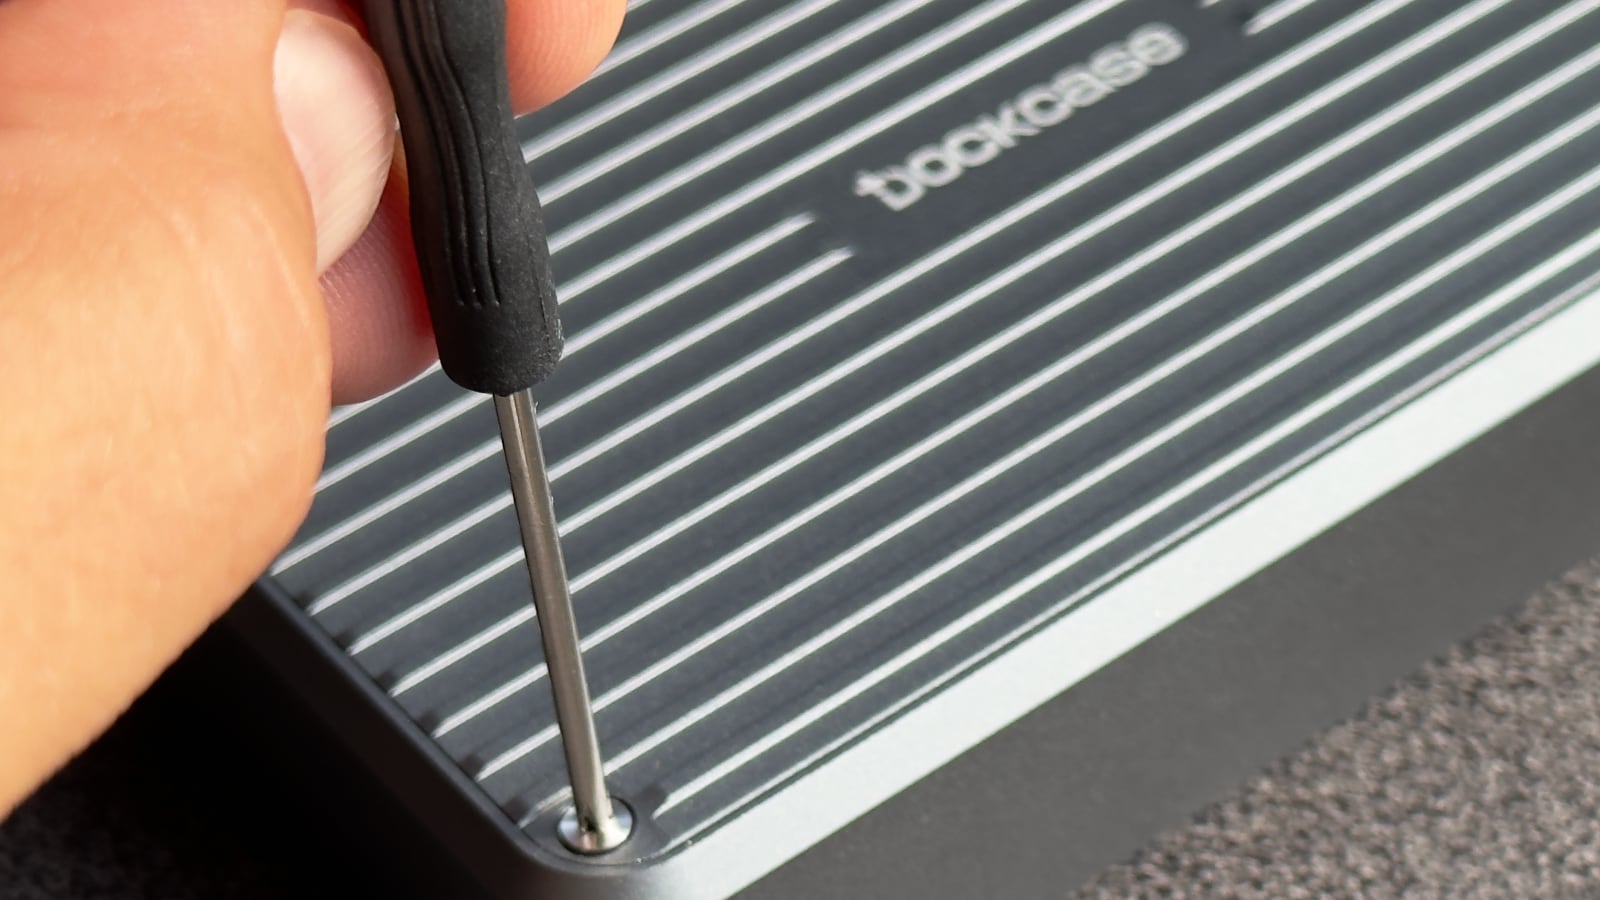 Closeup showing a male hand holding a screwdriver, tightening a Phillips Head #00 screw in a corner of the DockCase external storage enclosure.